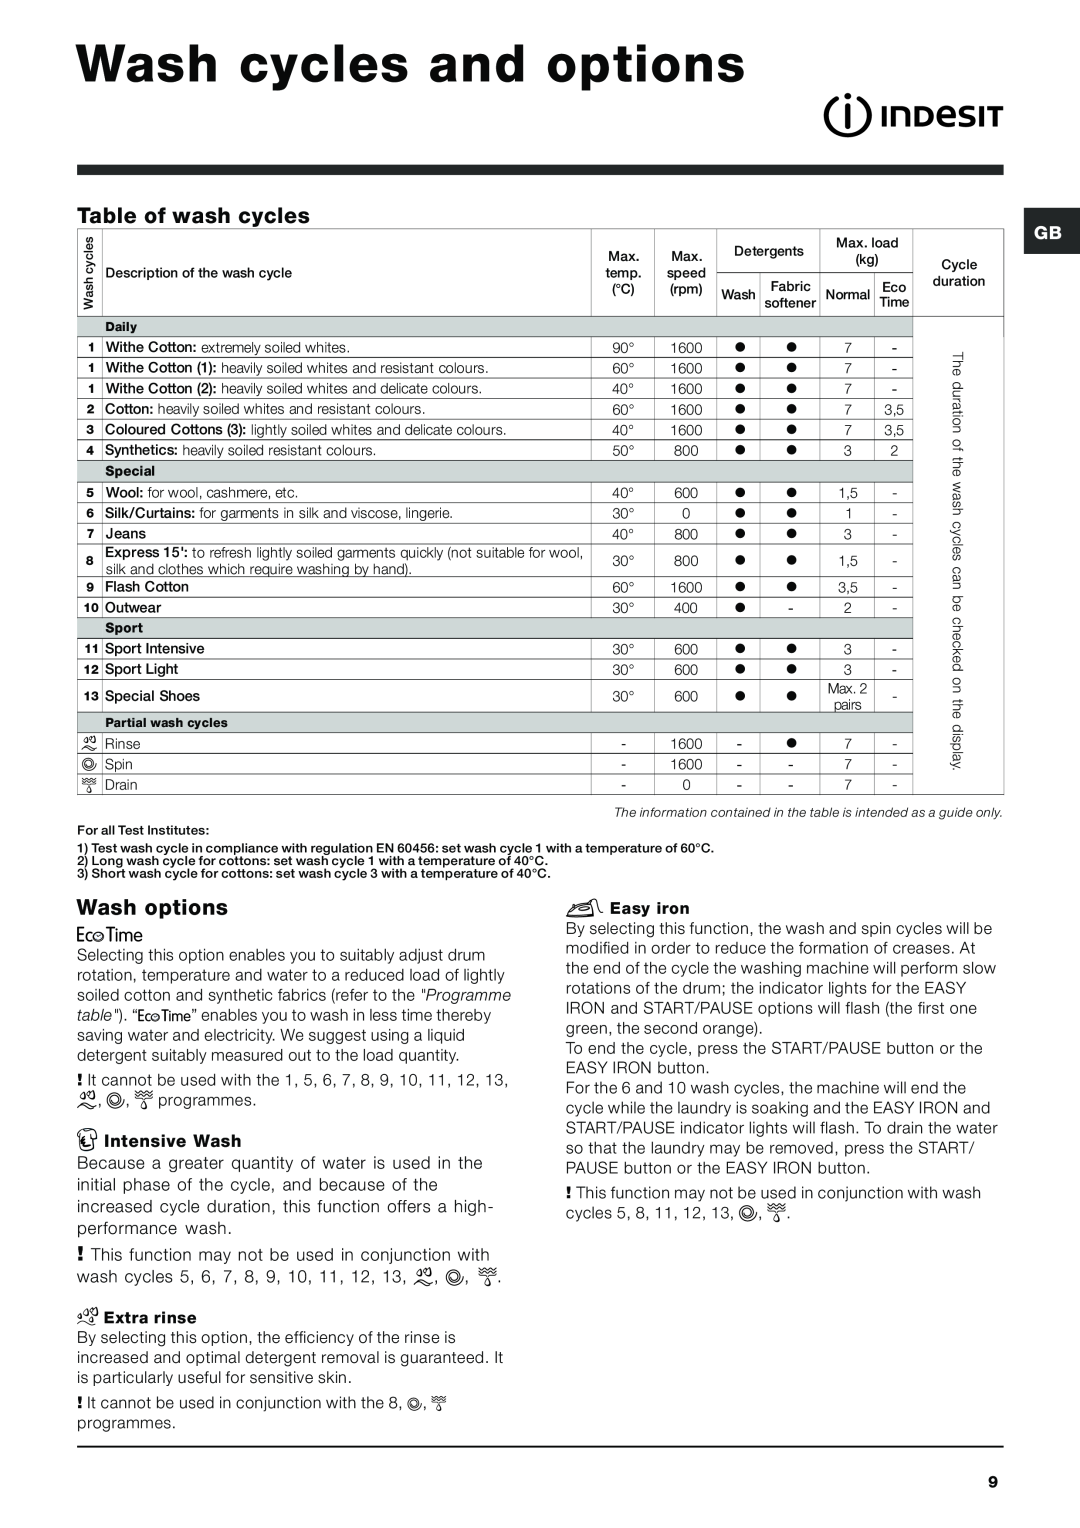 Indesit IWE7168 manual Wash cycles and options, Table of wash cycles, Wash options 